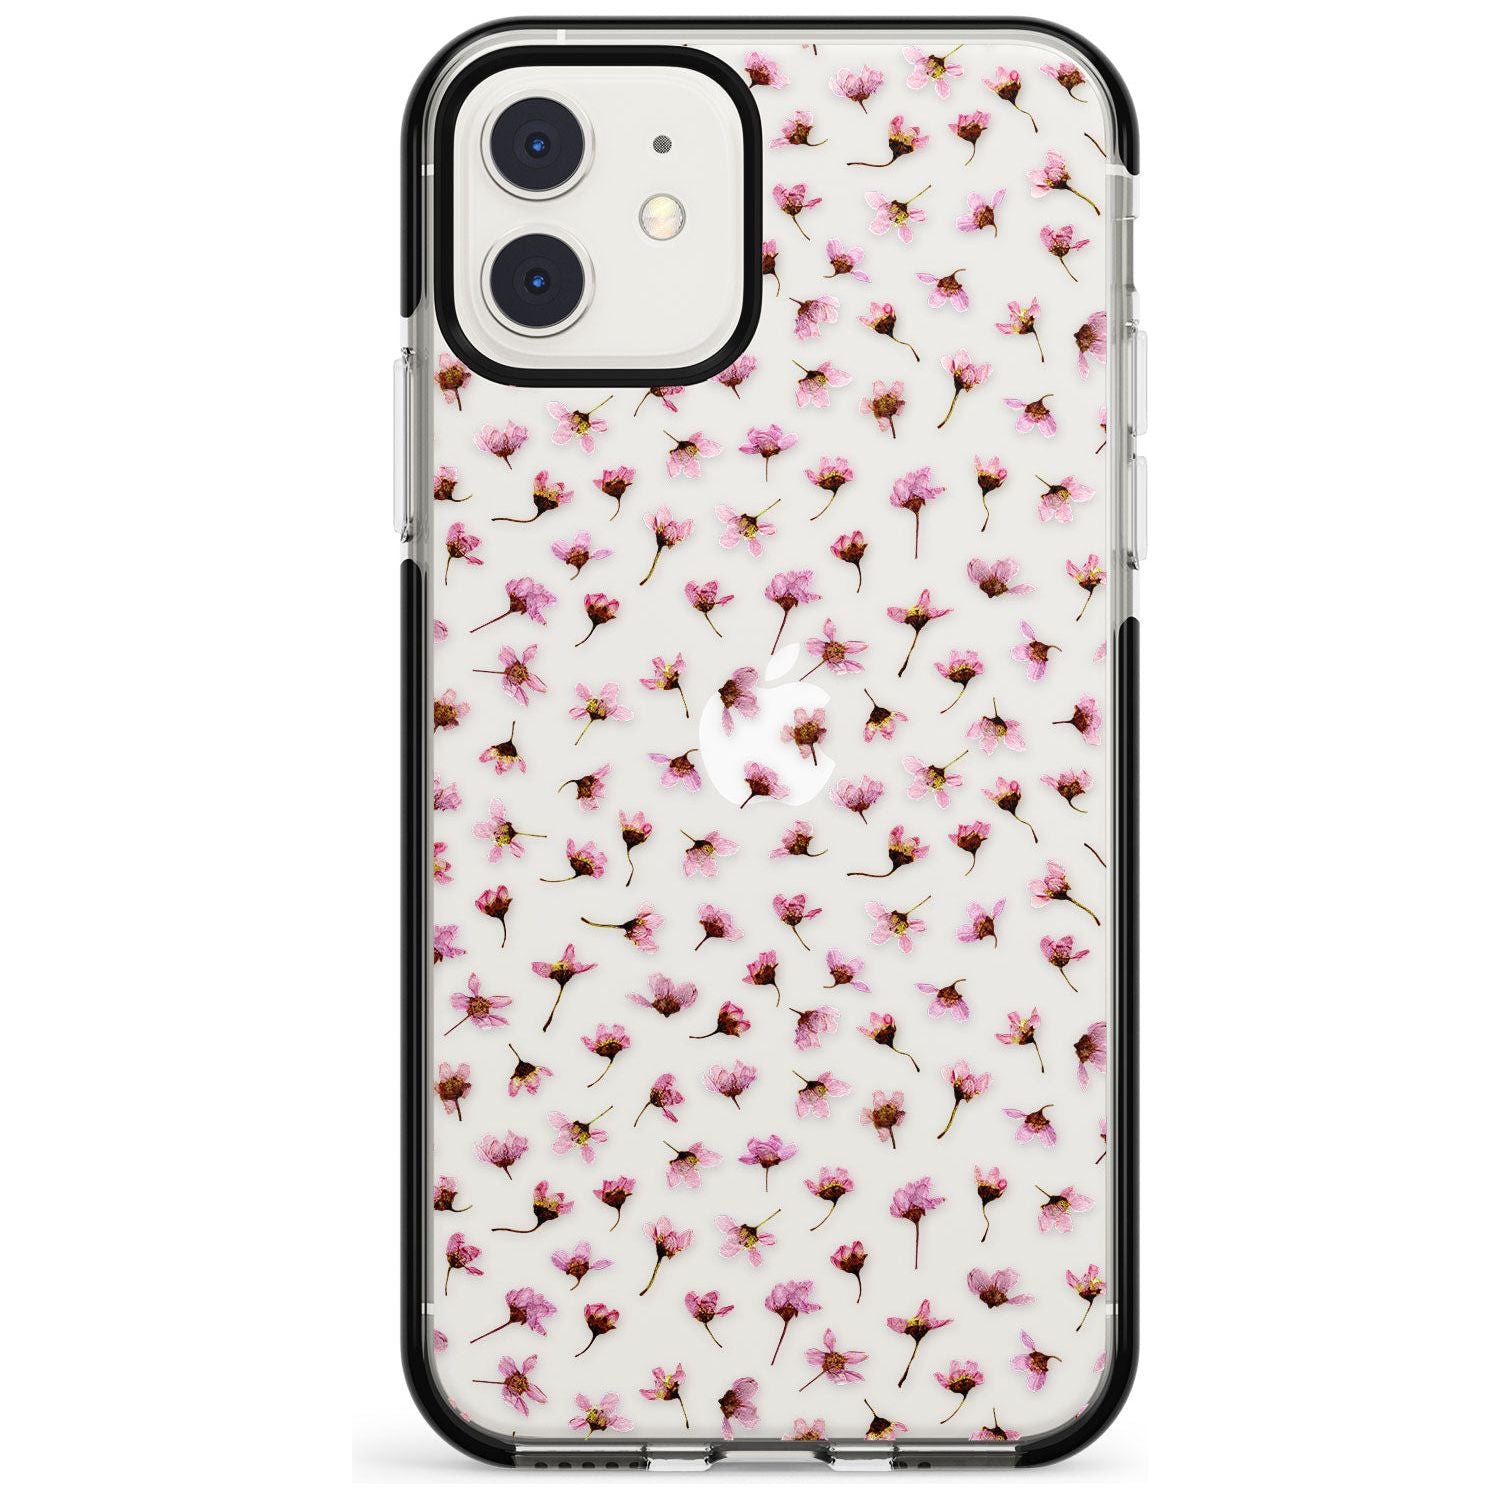 Small Pink Blossoms Transparent Design Black Impact Phone Case for iPhone 11